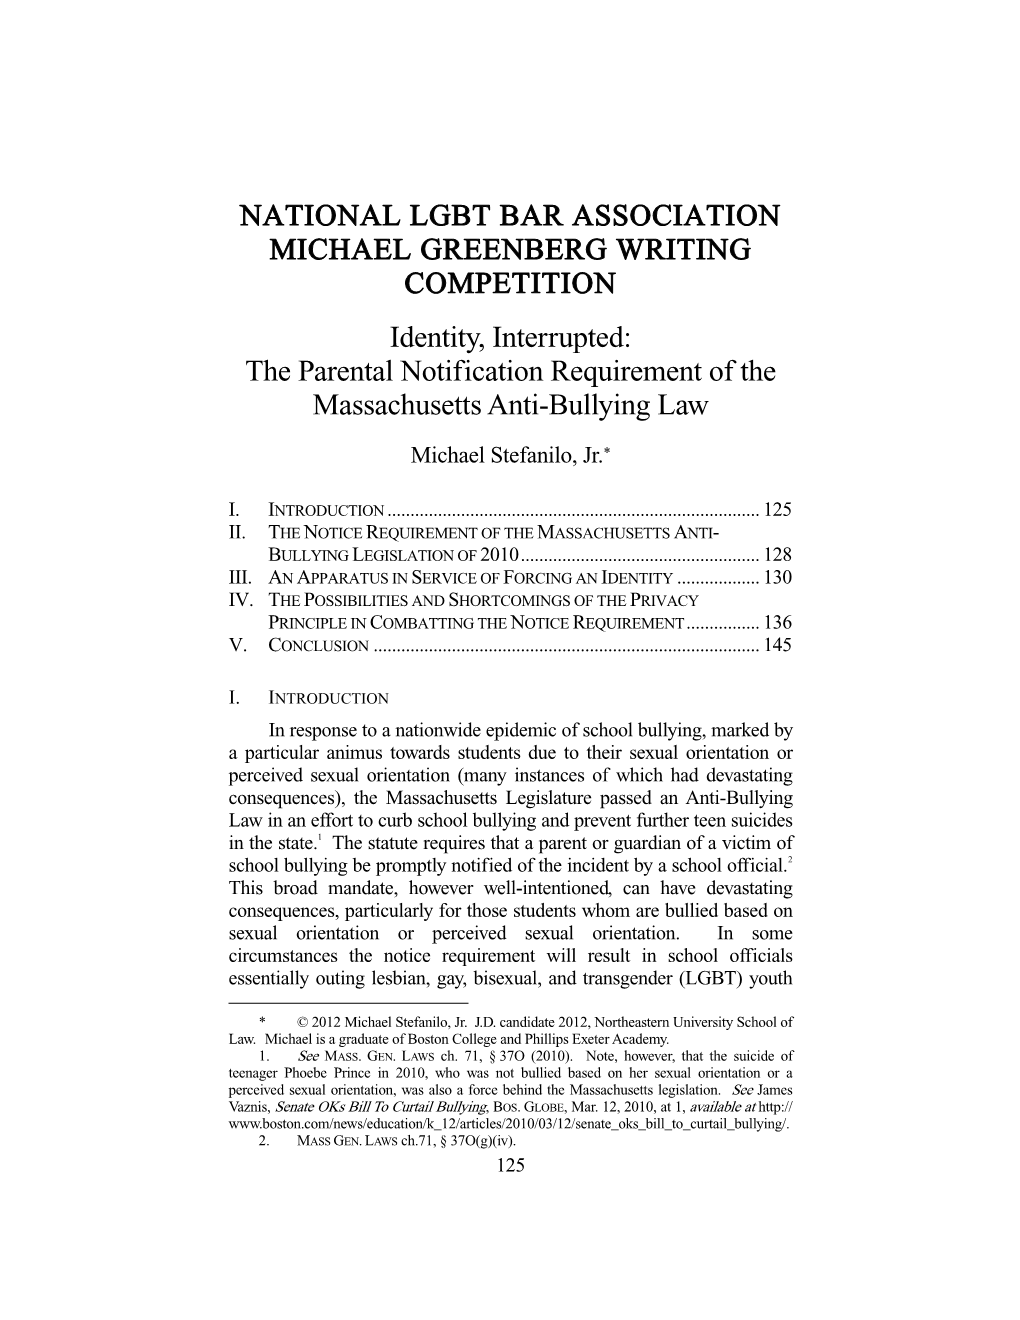 NATIONAL LGBT BAR ASSOCIATION MICHAEL GREENBERG WRITING COMPETITION Identity, Interrupted